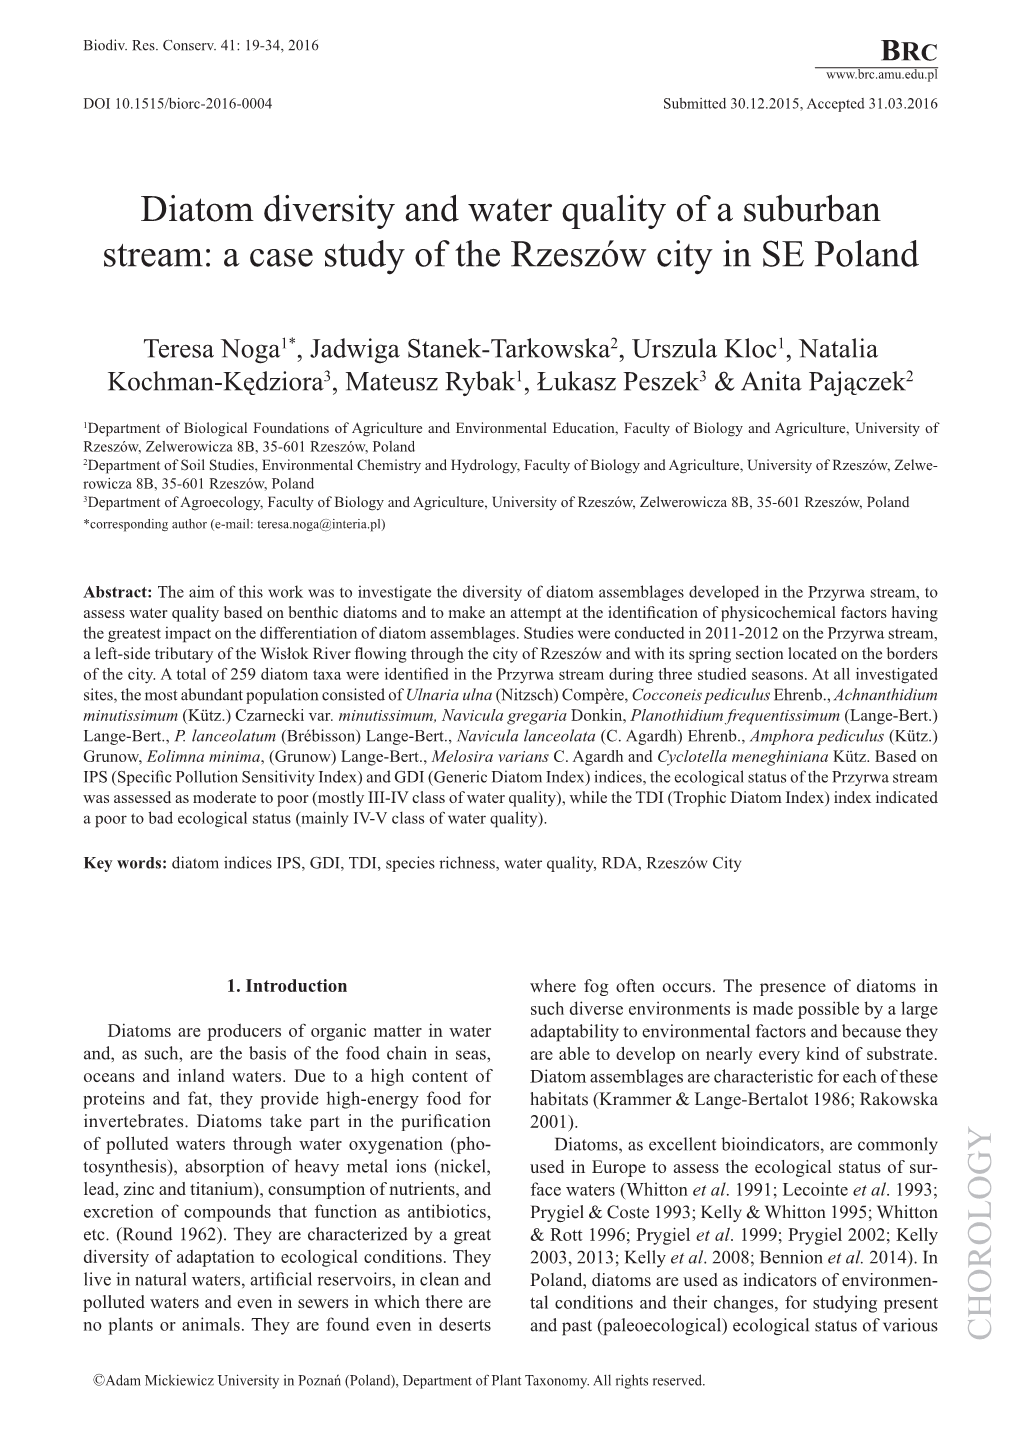 Diatom Diversity and Water Quality of a Suburban Stream: a Case Study of the Rzeszów City in SE Poland